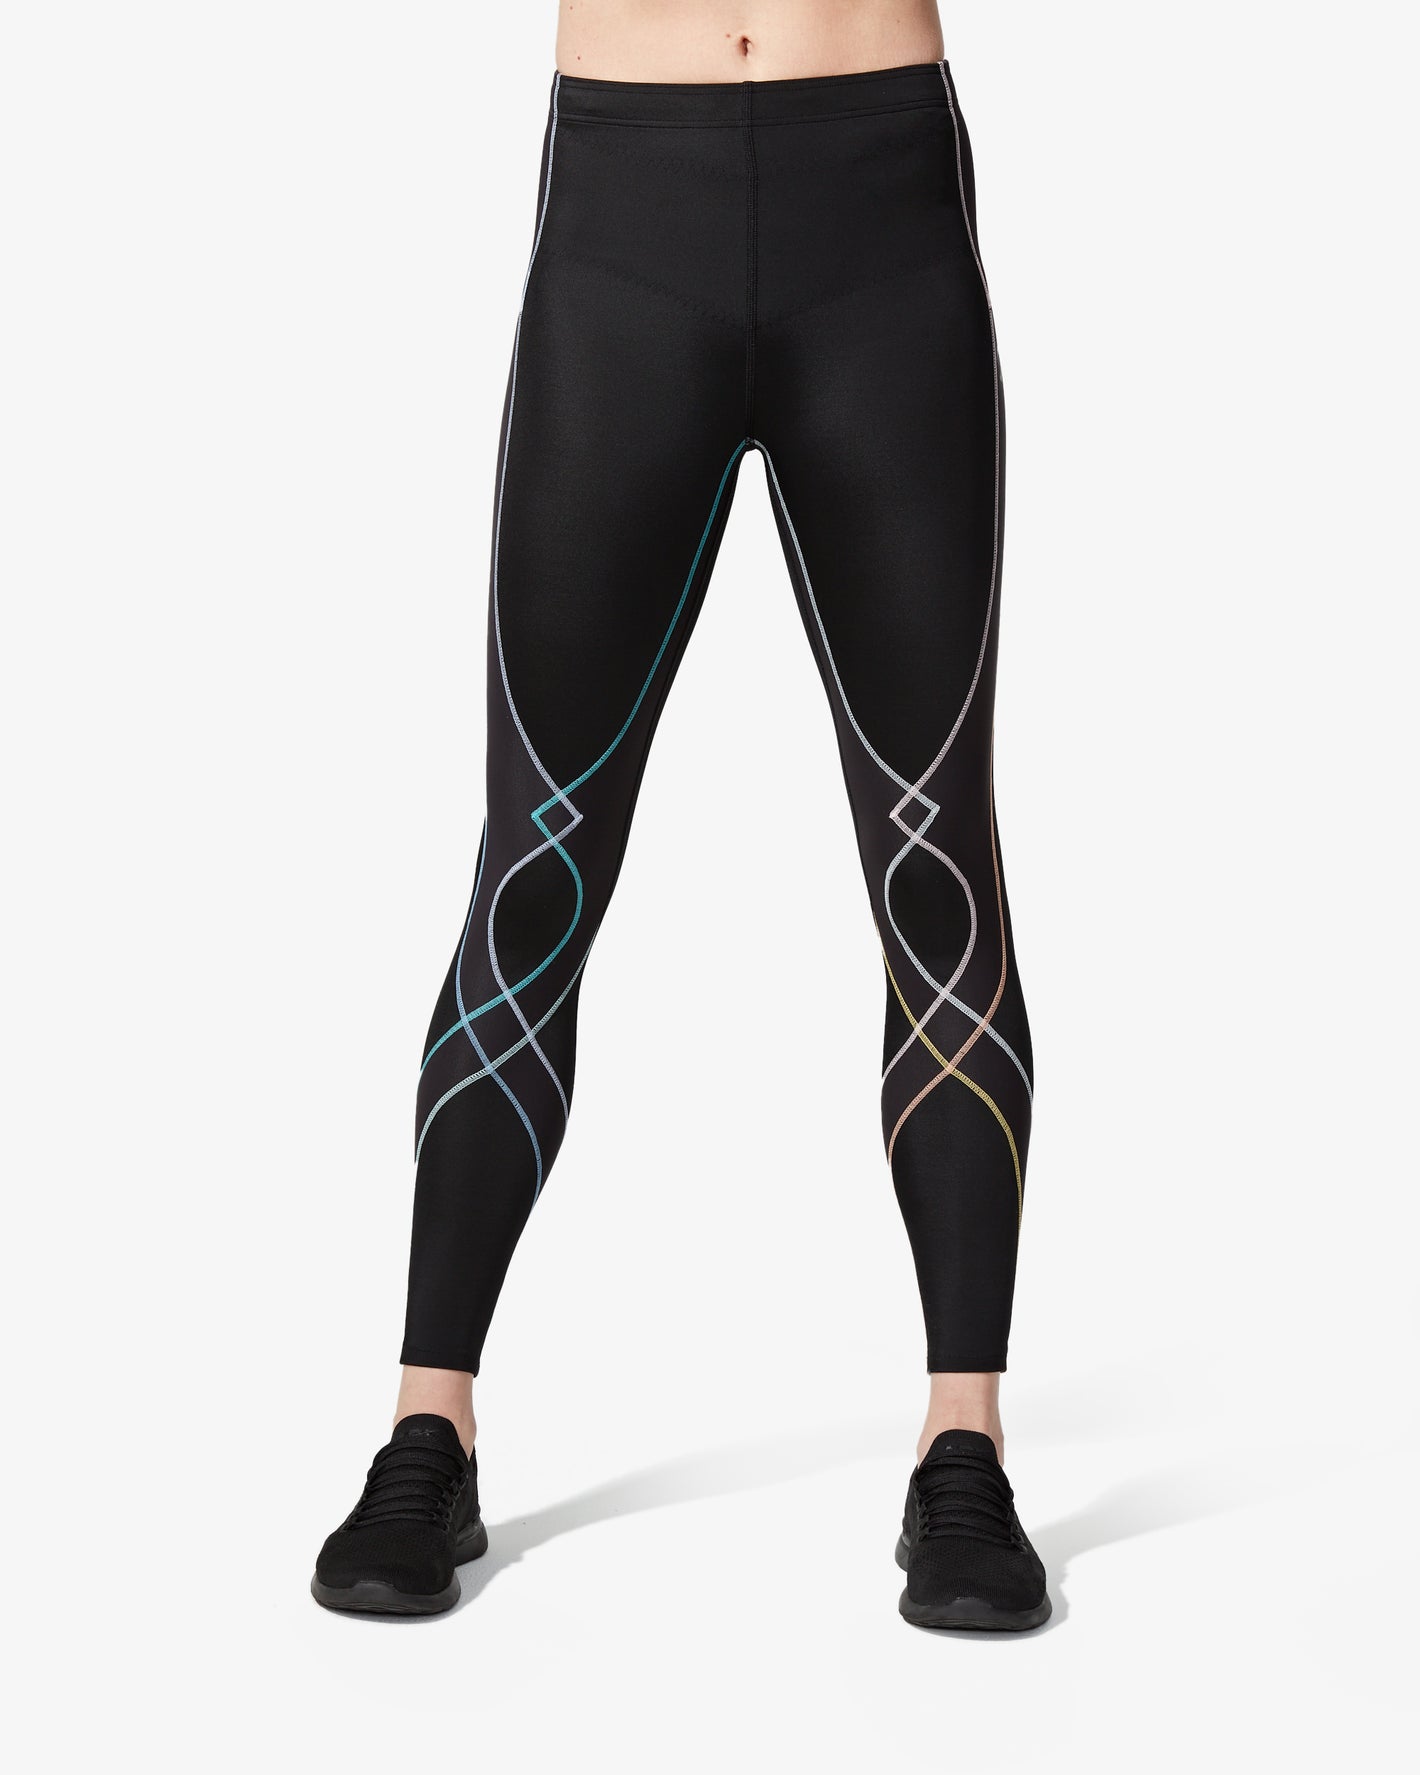 Energetic Compression Leggings for Men with Calf Kinesiology Tape